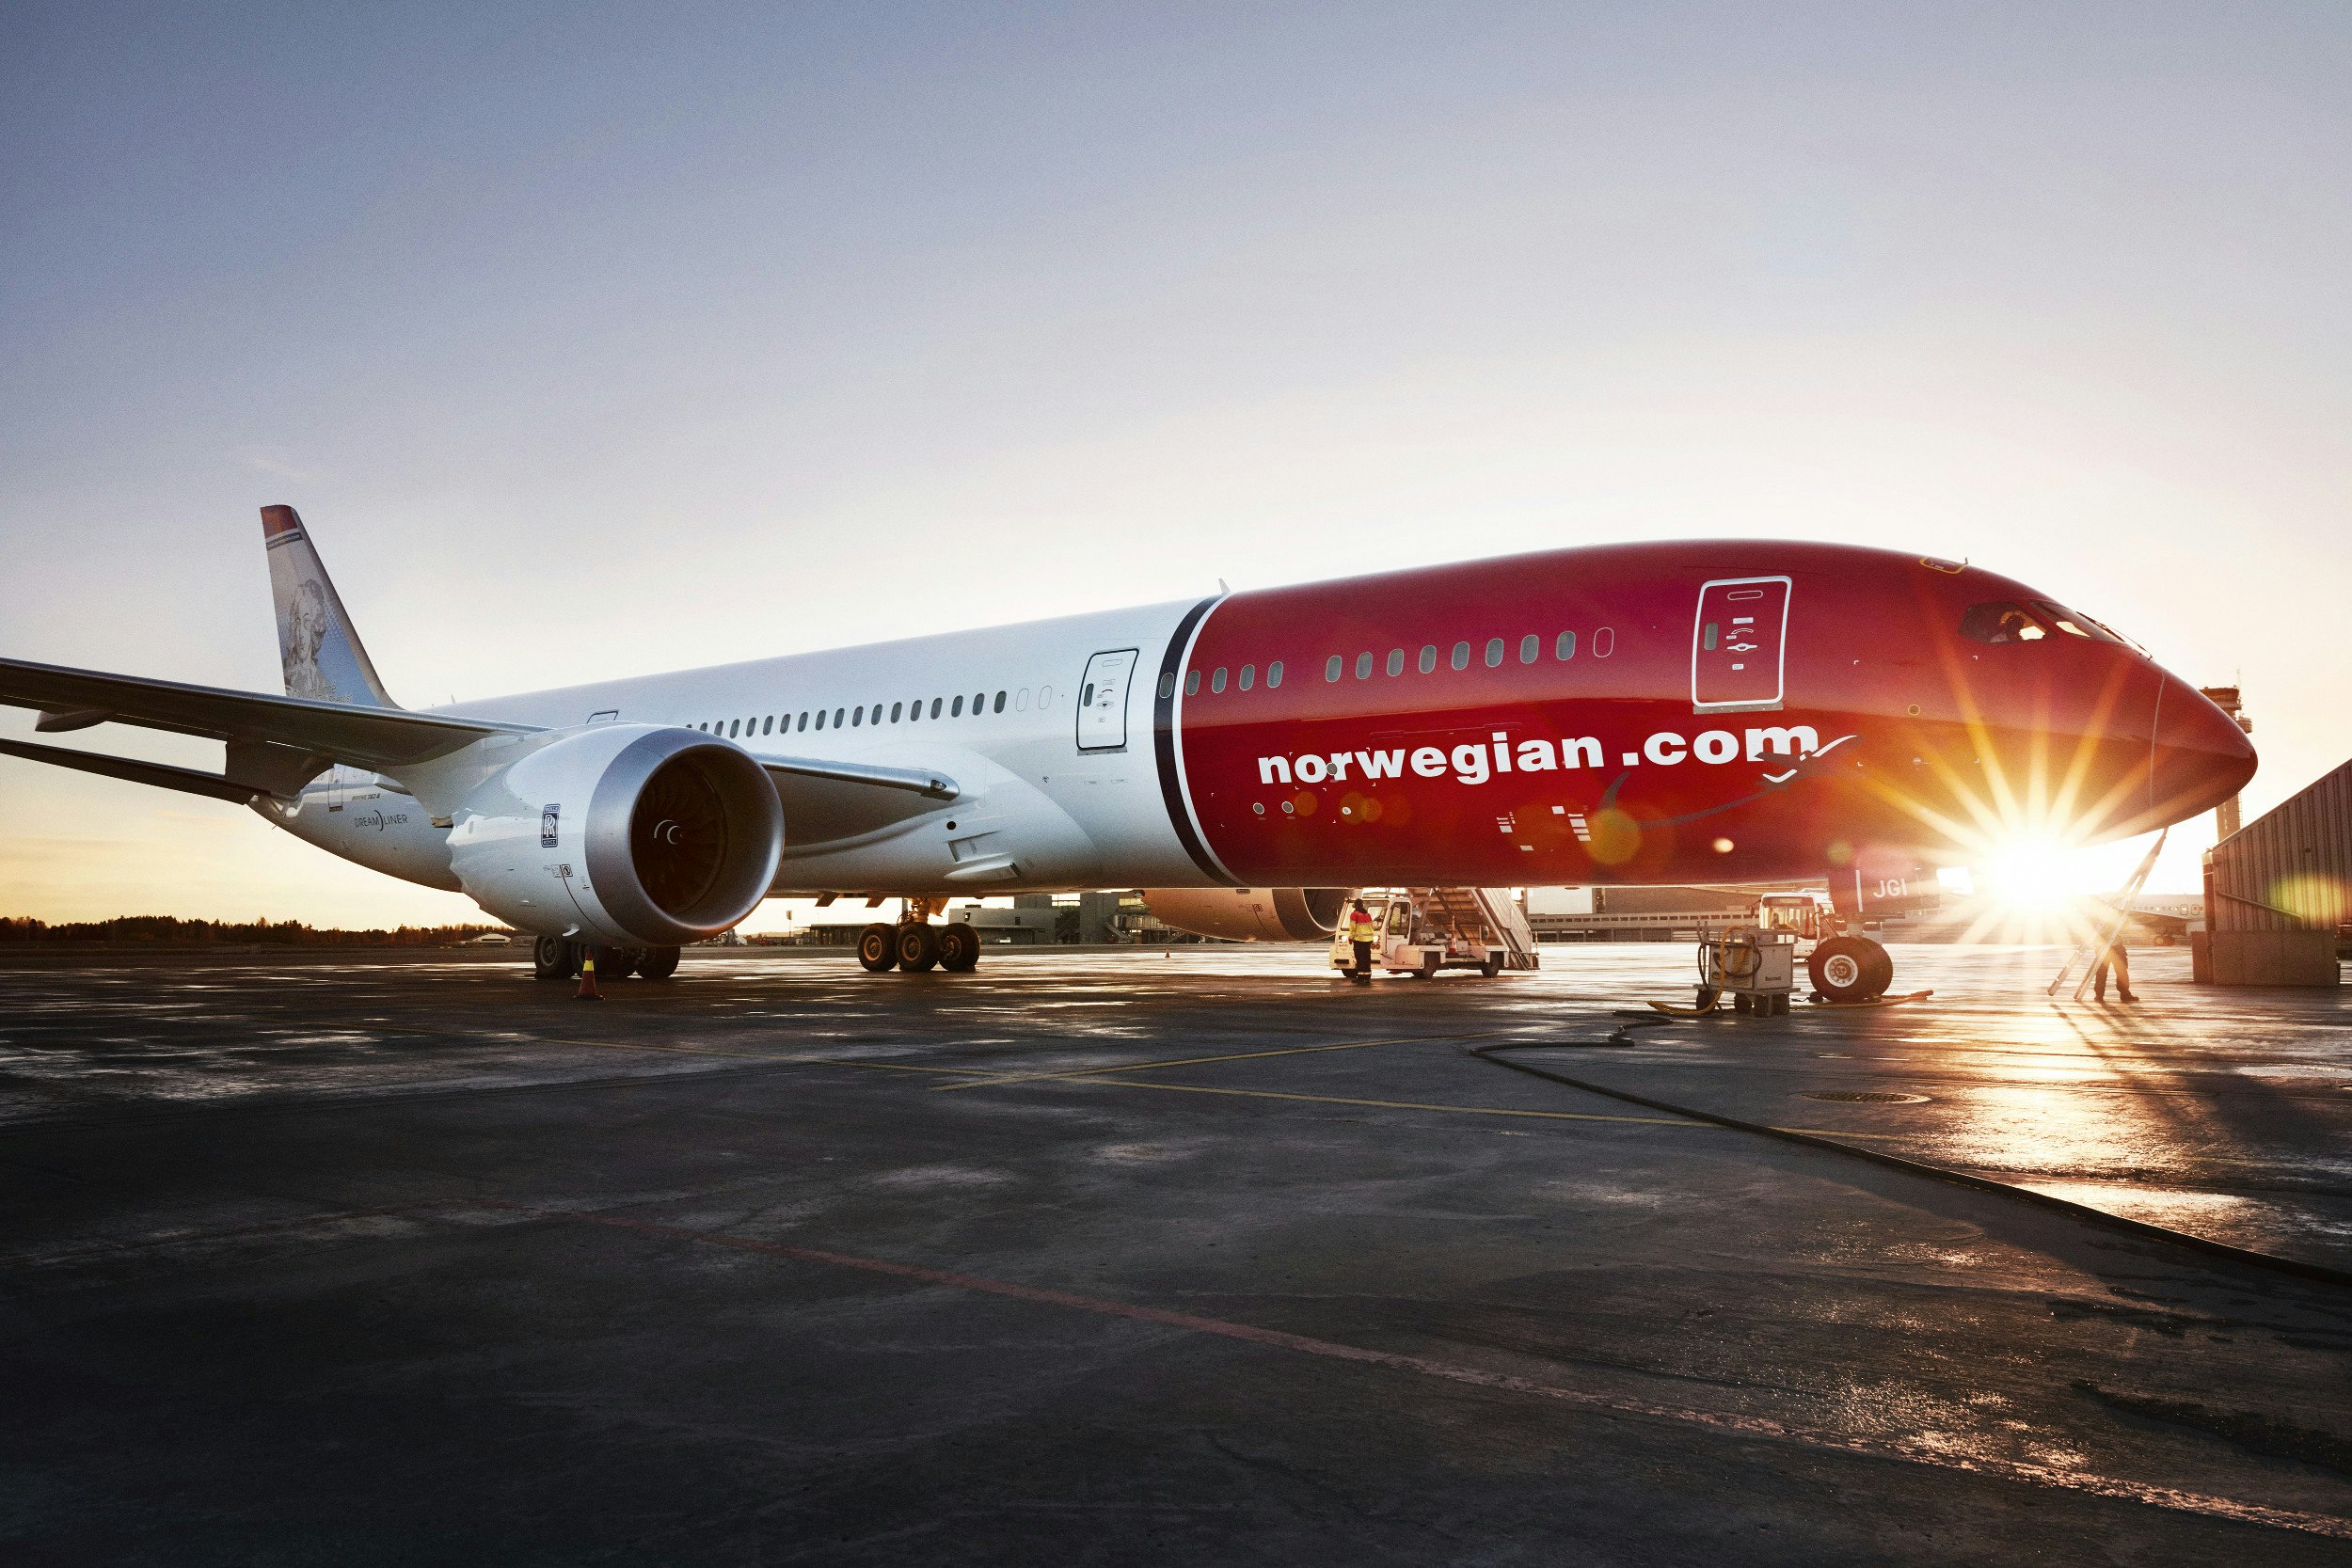 A Norwegian airline plane on the tarmac